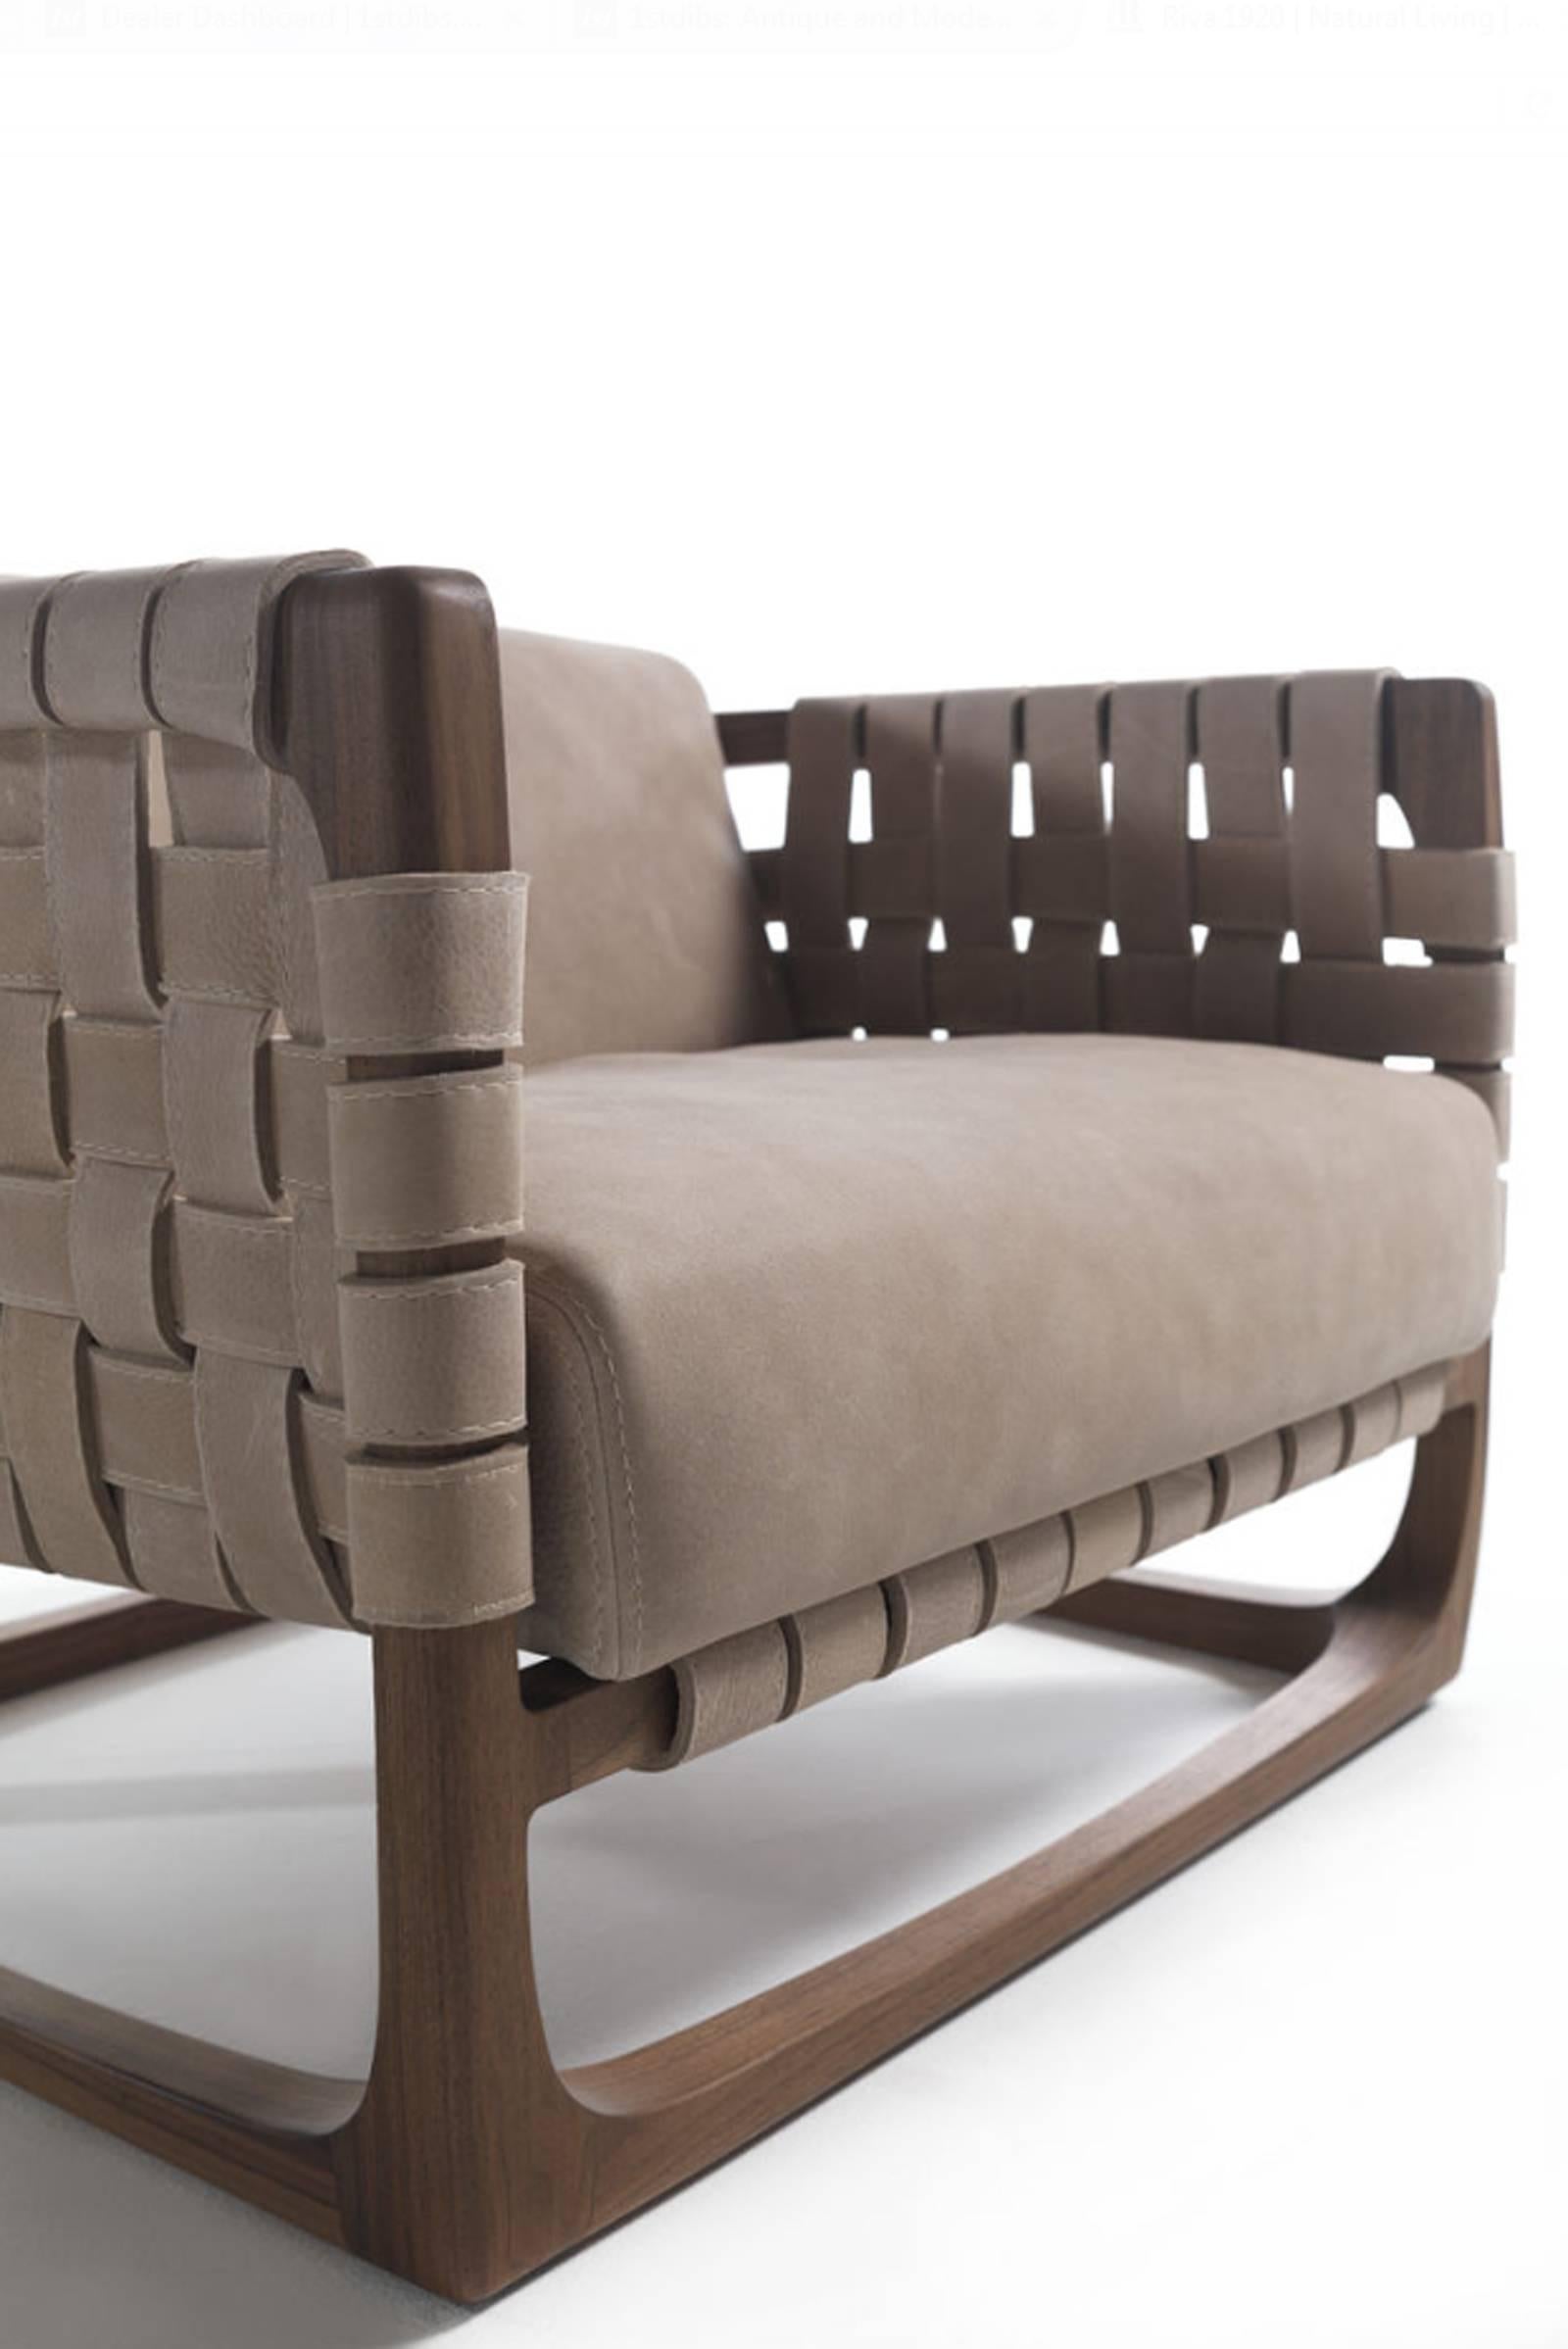 Webbing Armchair Padded Seat in Nubuck Leather in solid walnut In Excellent Condition For Sale In Paris, FR